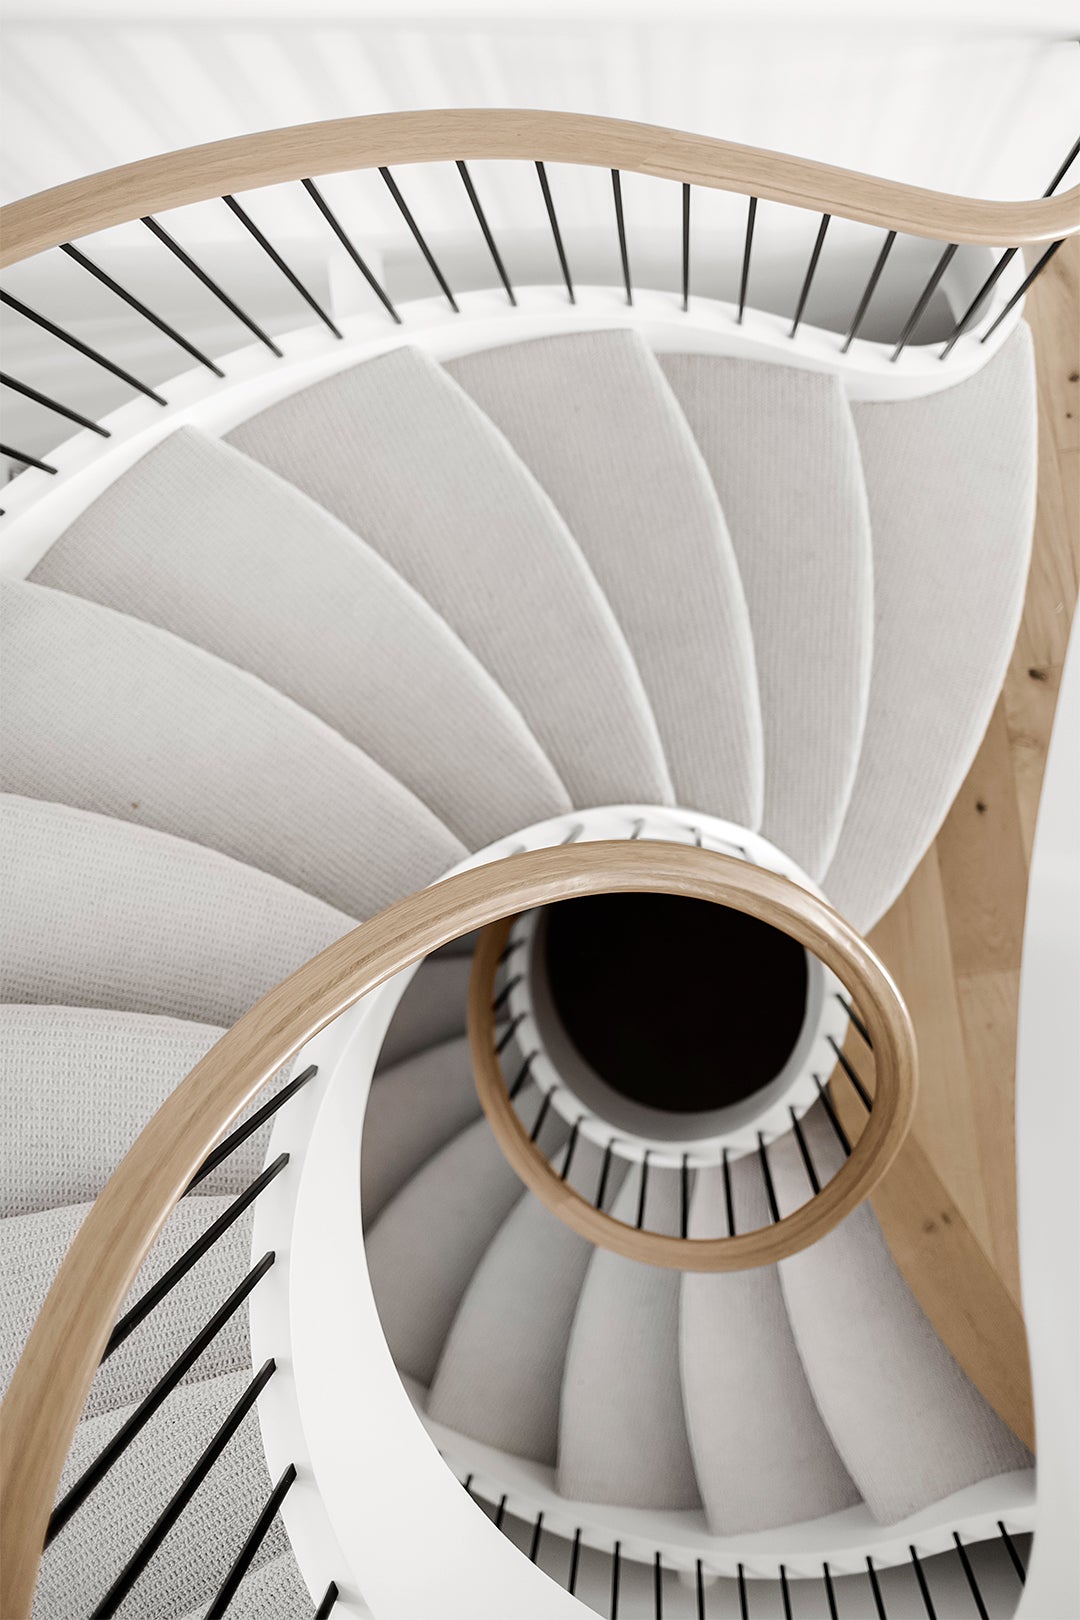 birds eye view of spiral stairs